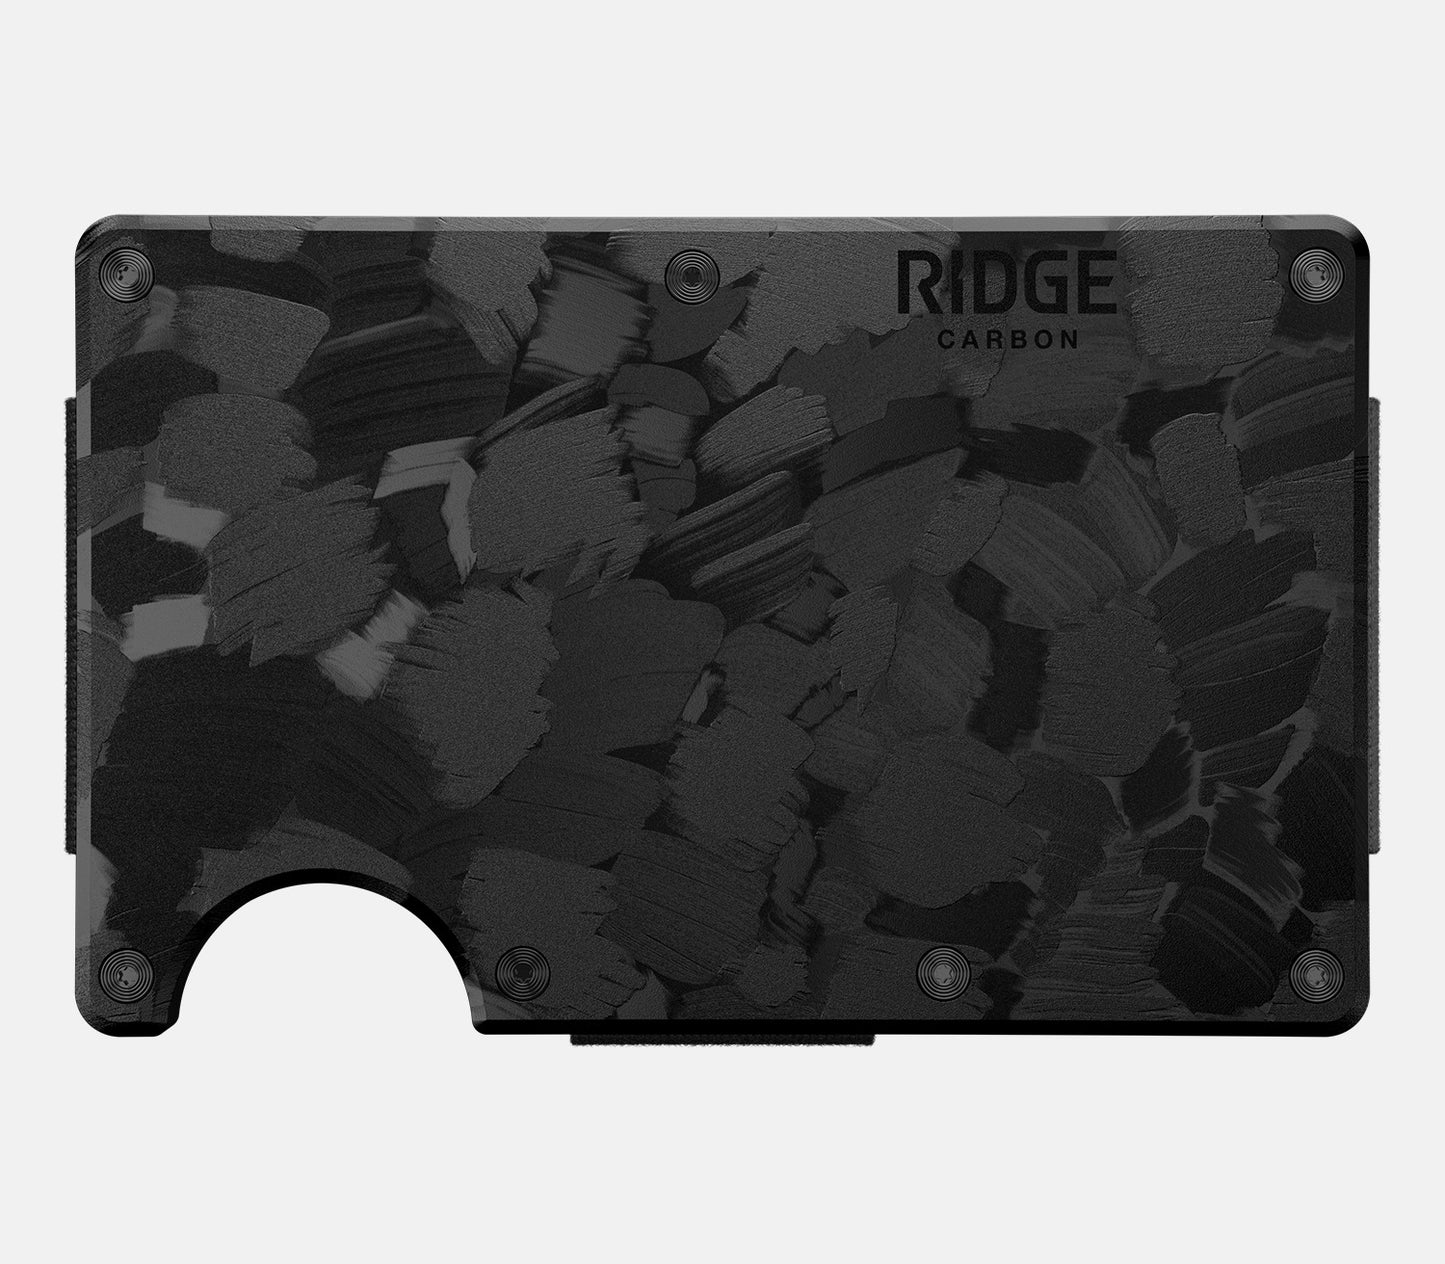 The Ridge Wallet Forged Carbon